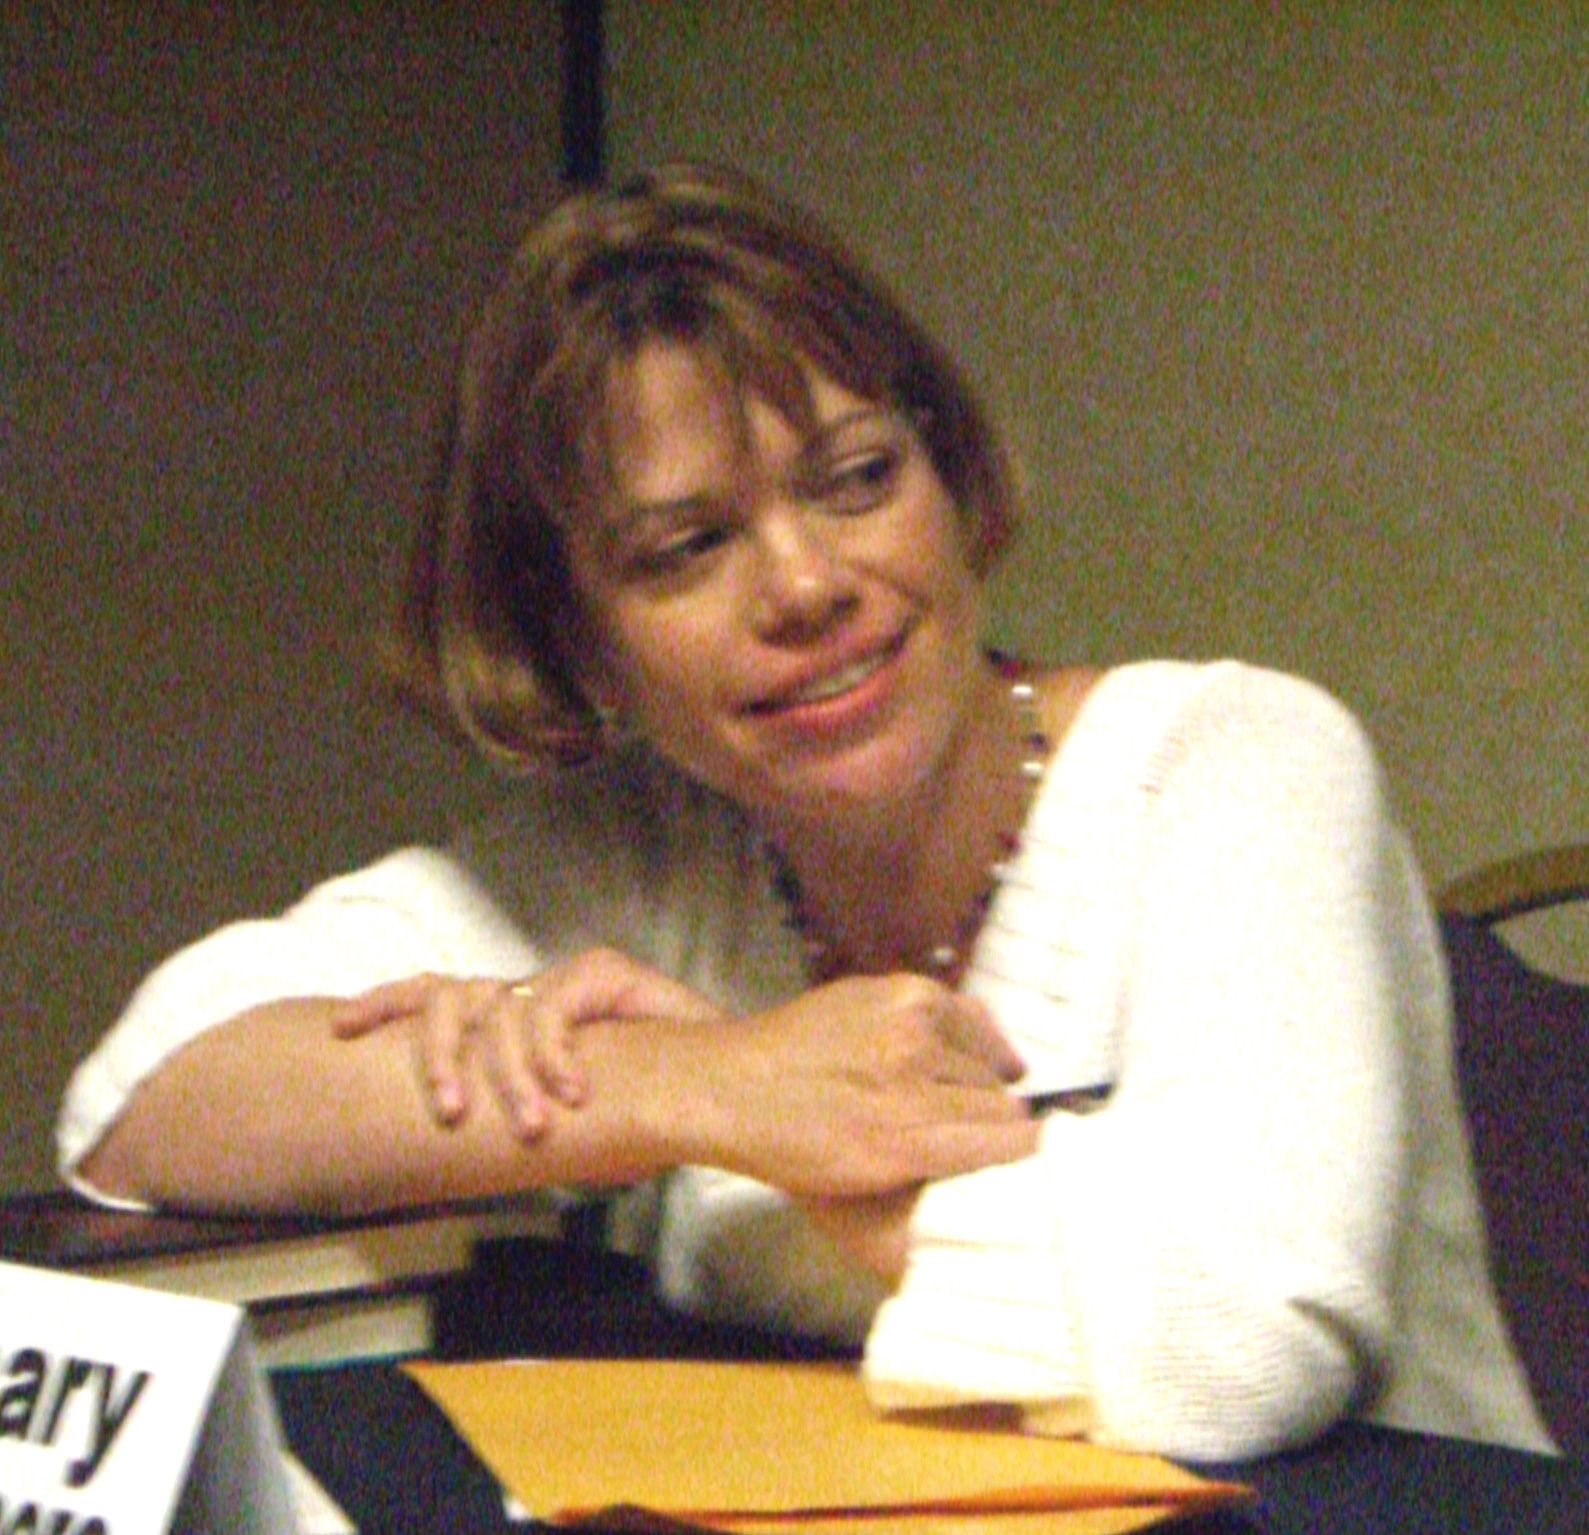 ApolloCon 2007 panel on self-editing: Rosemary Clement-Moore